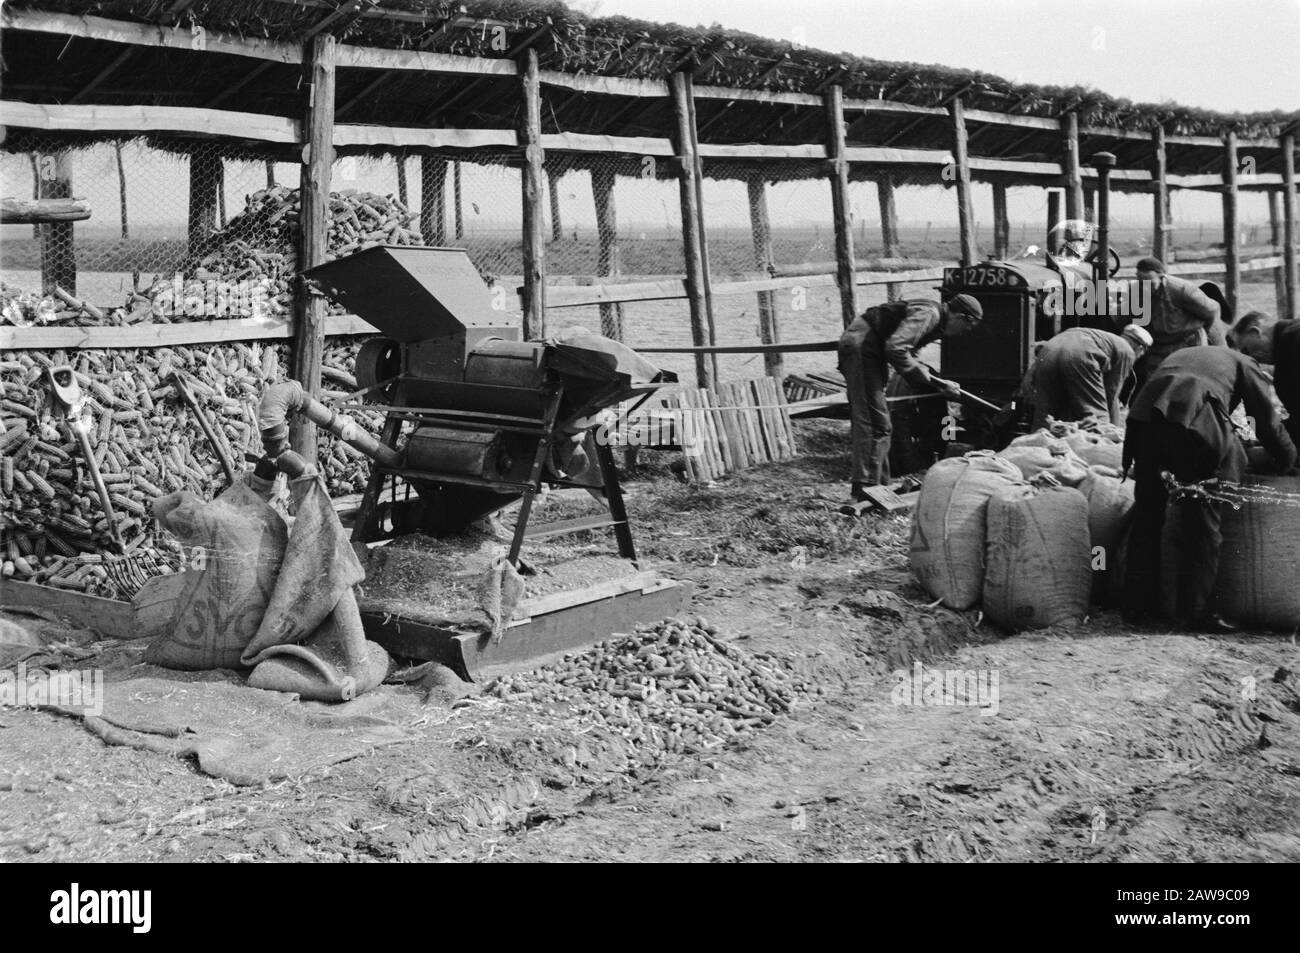 corn cultivation and tobacco, workers, work Date: April 1950 Location: Zeeland Keywords: workers, maize crops and tobacco, work Stock Photo